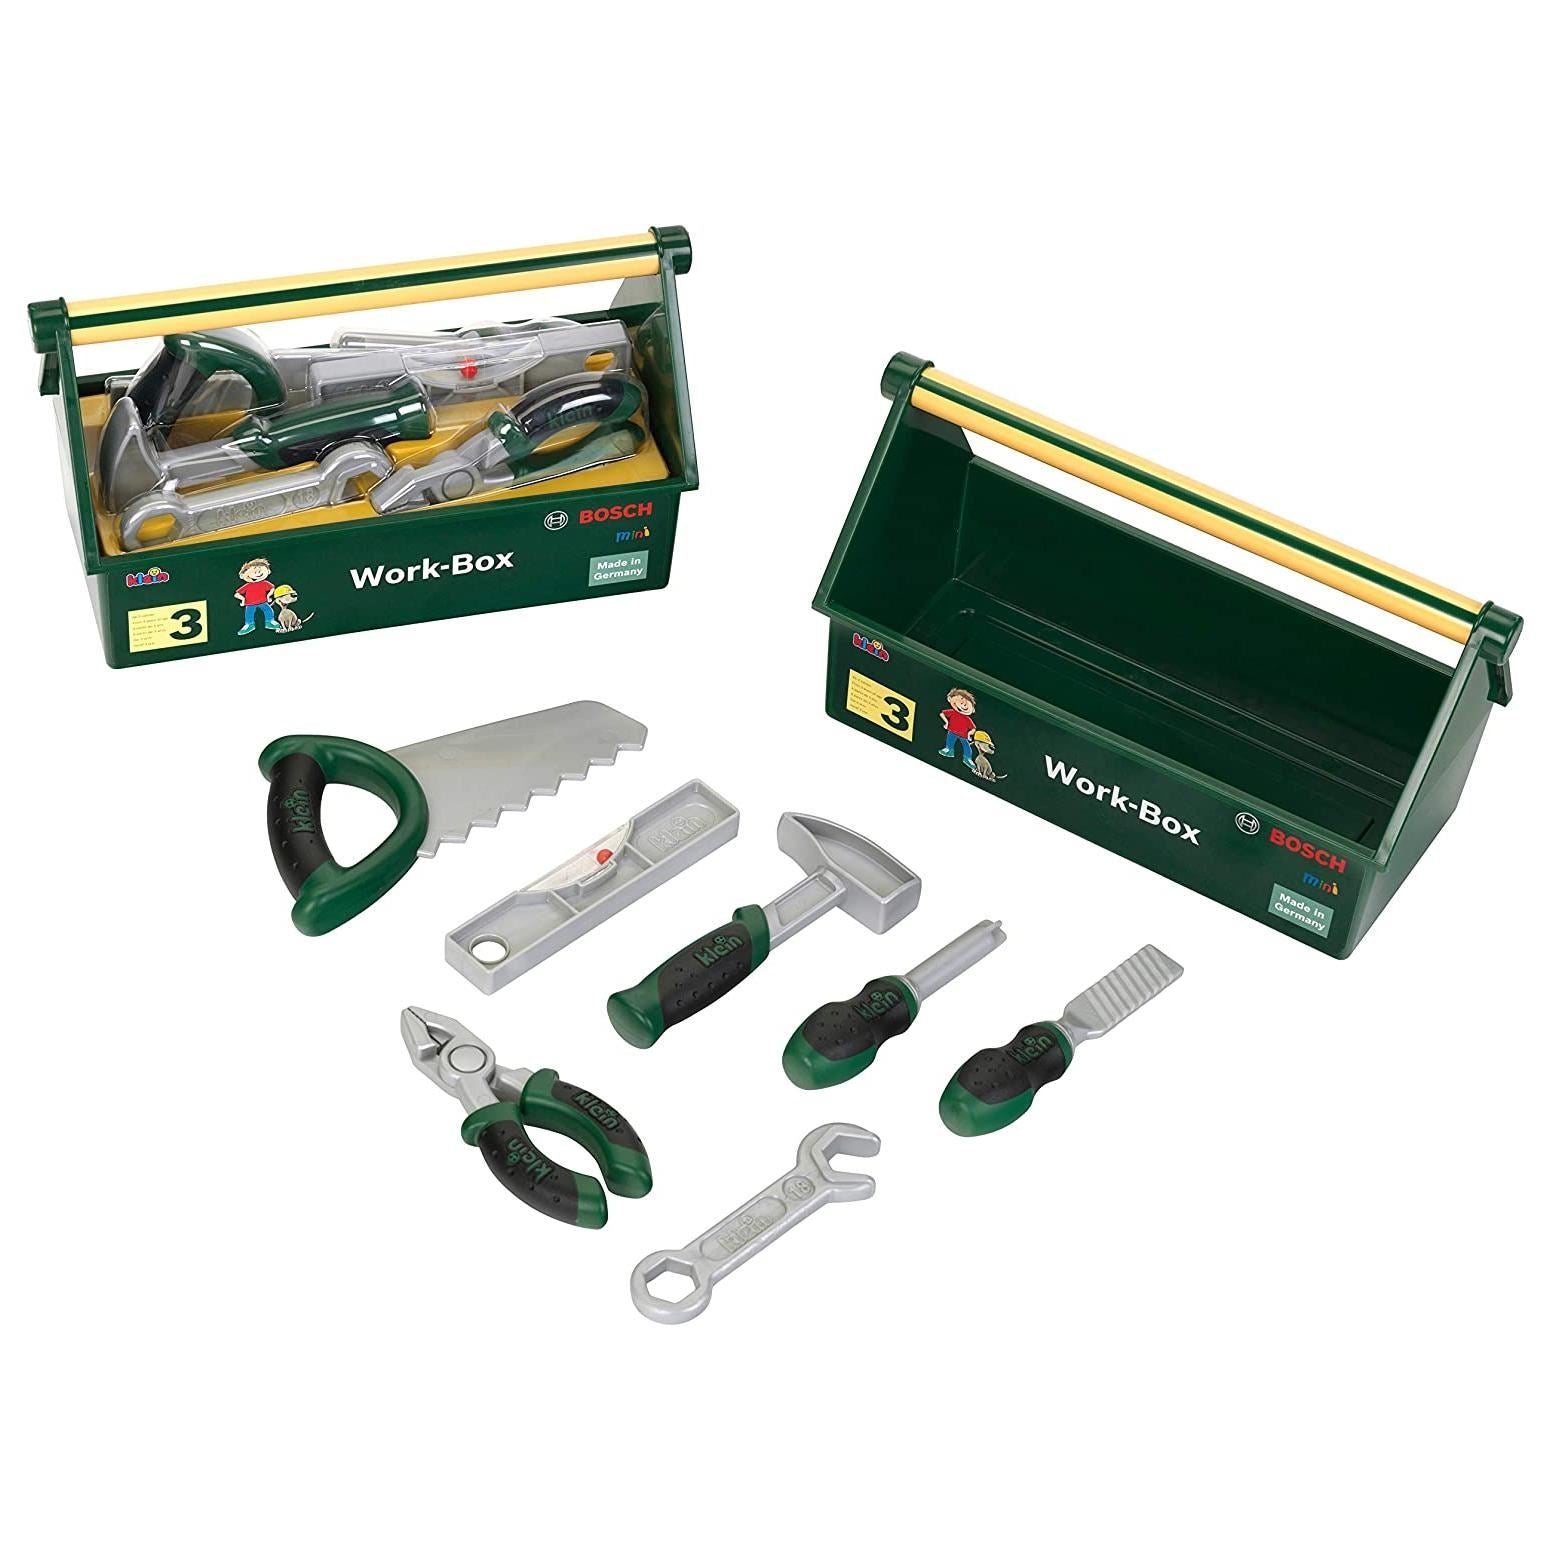 Tool Box, 7- Part Tool Kit, Toy for Children Aged 3 Years and up , BOSCH Tool Work Boxbench, Toolbox, your little builder, builder, Work